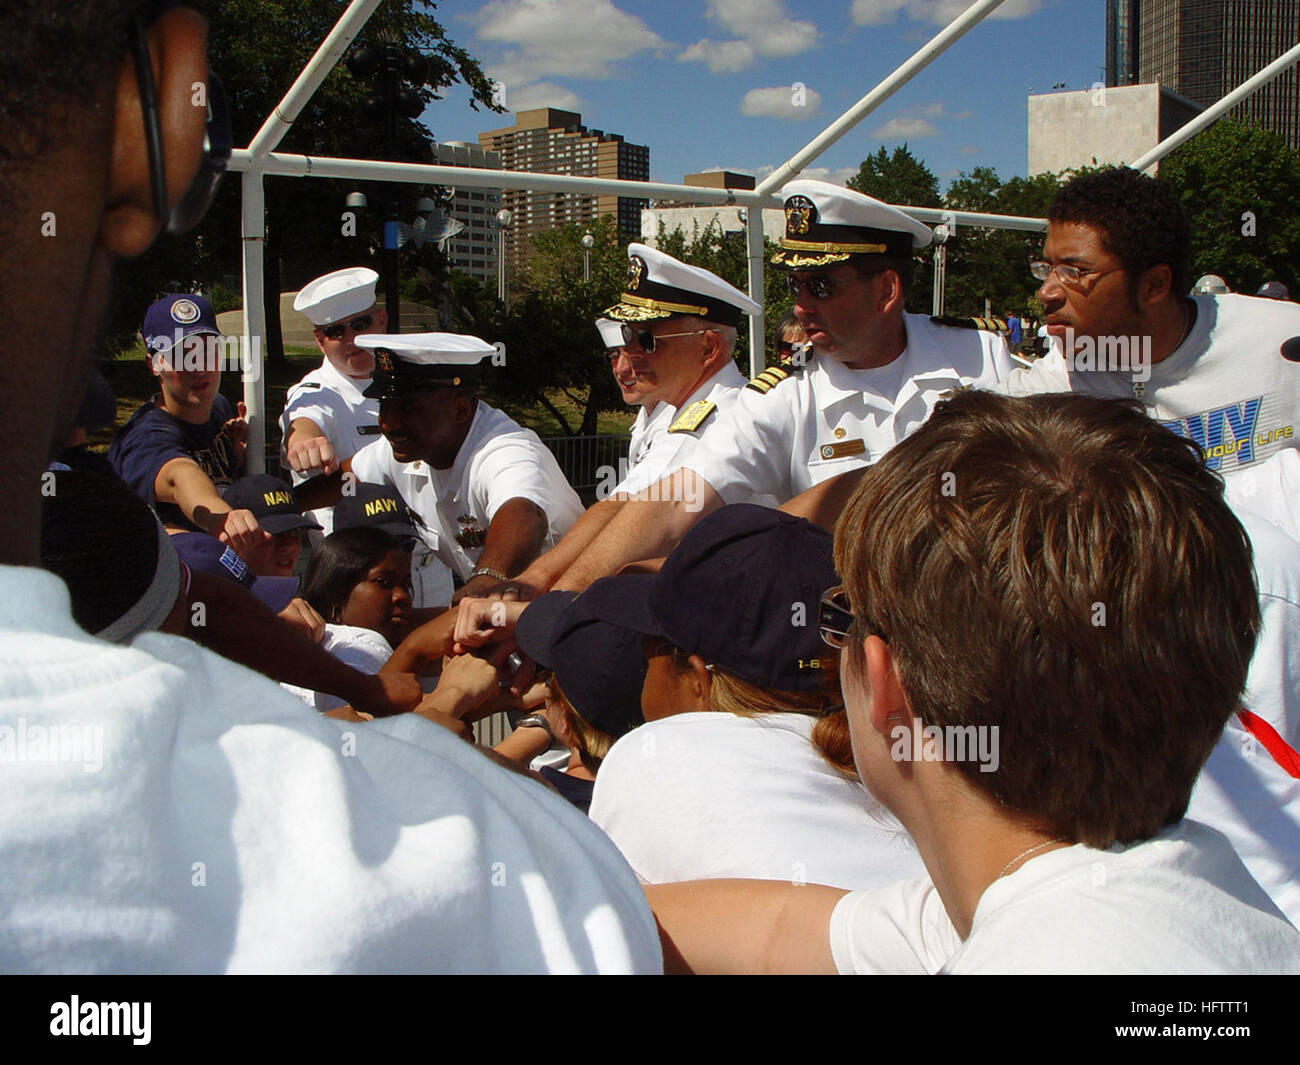 070711-N-2888Q-003  DETROIT (July 11, 2007) - Commander, Naval Surface Forces, Vice Adm. Terrance Etnyre (center) and Commanding Officer, Navy Recruiting District Michigan, Cmdr. Greg Maguire participate in a group hoorah with Delayed Entry Program members aboard U.S. Naval Sea Cadet training ship Grayfox (TWR 825). Grayfox is conducting cruises at part of Navy Week Detroit. The week is one of 26 Navy Weeks planned across America in 2007. Navy Weeks are designed to show Americans the investment they have made in their Navy and increase awareness in cities that do not have a significant Navy pr Stock Photo